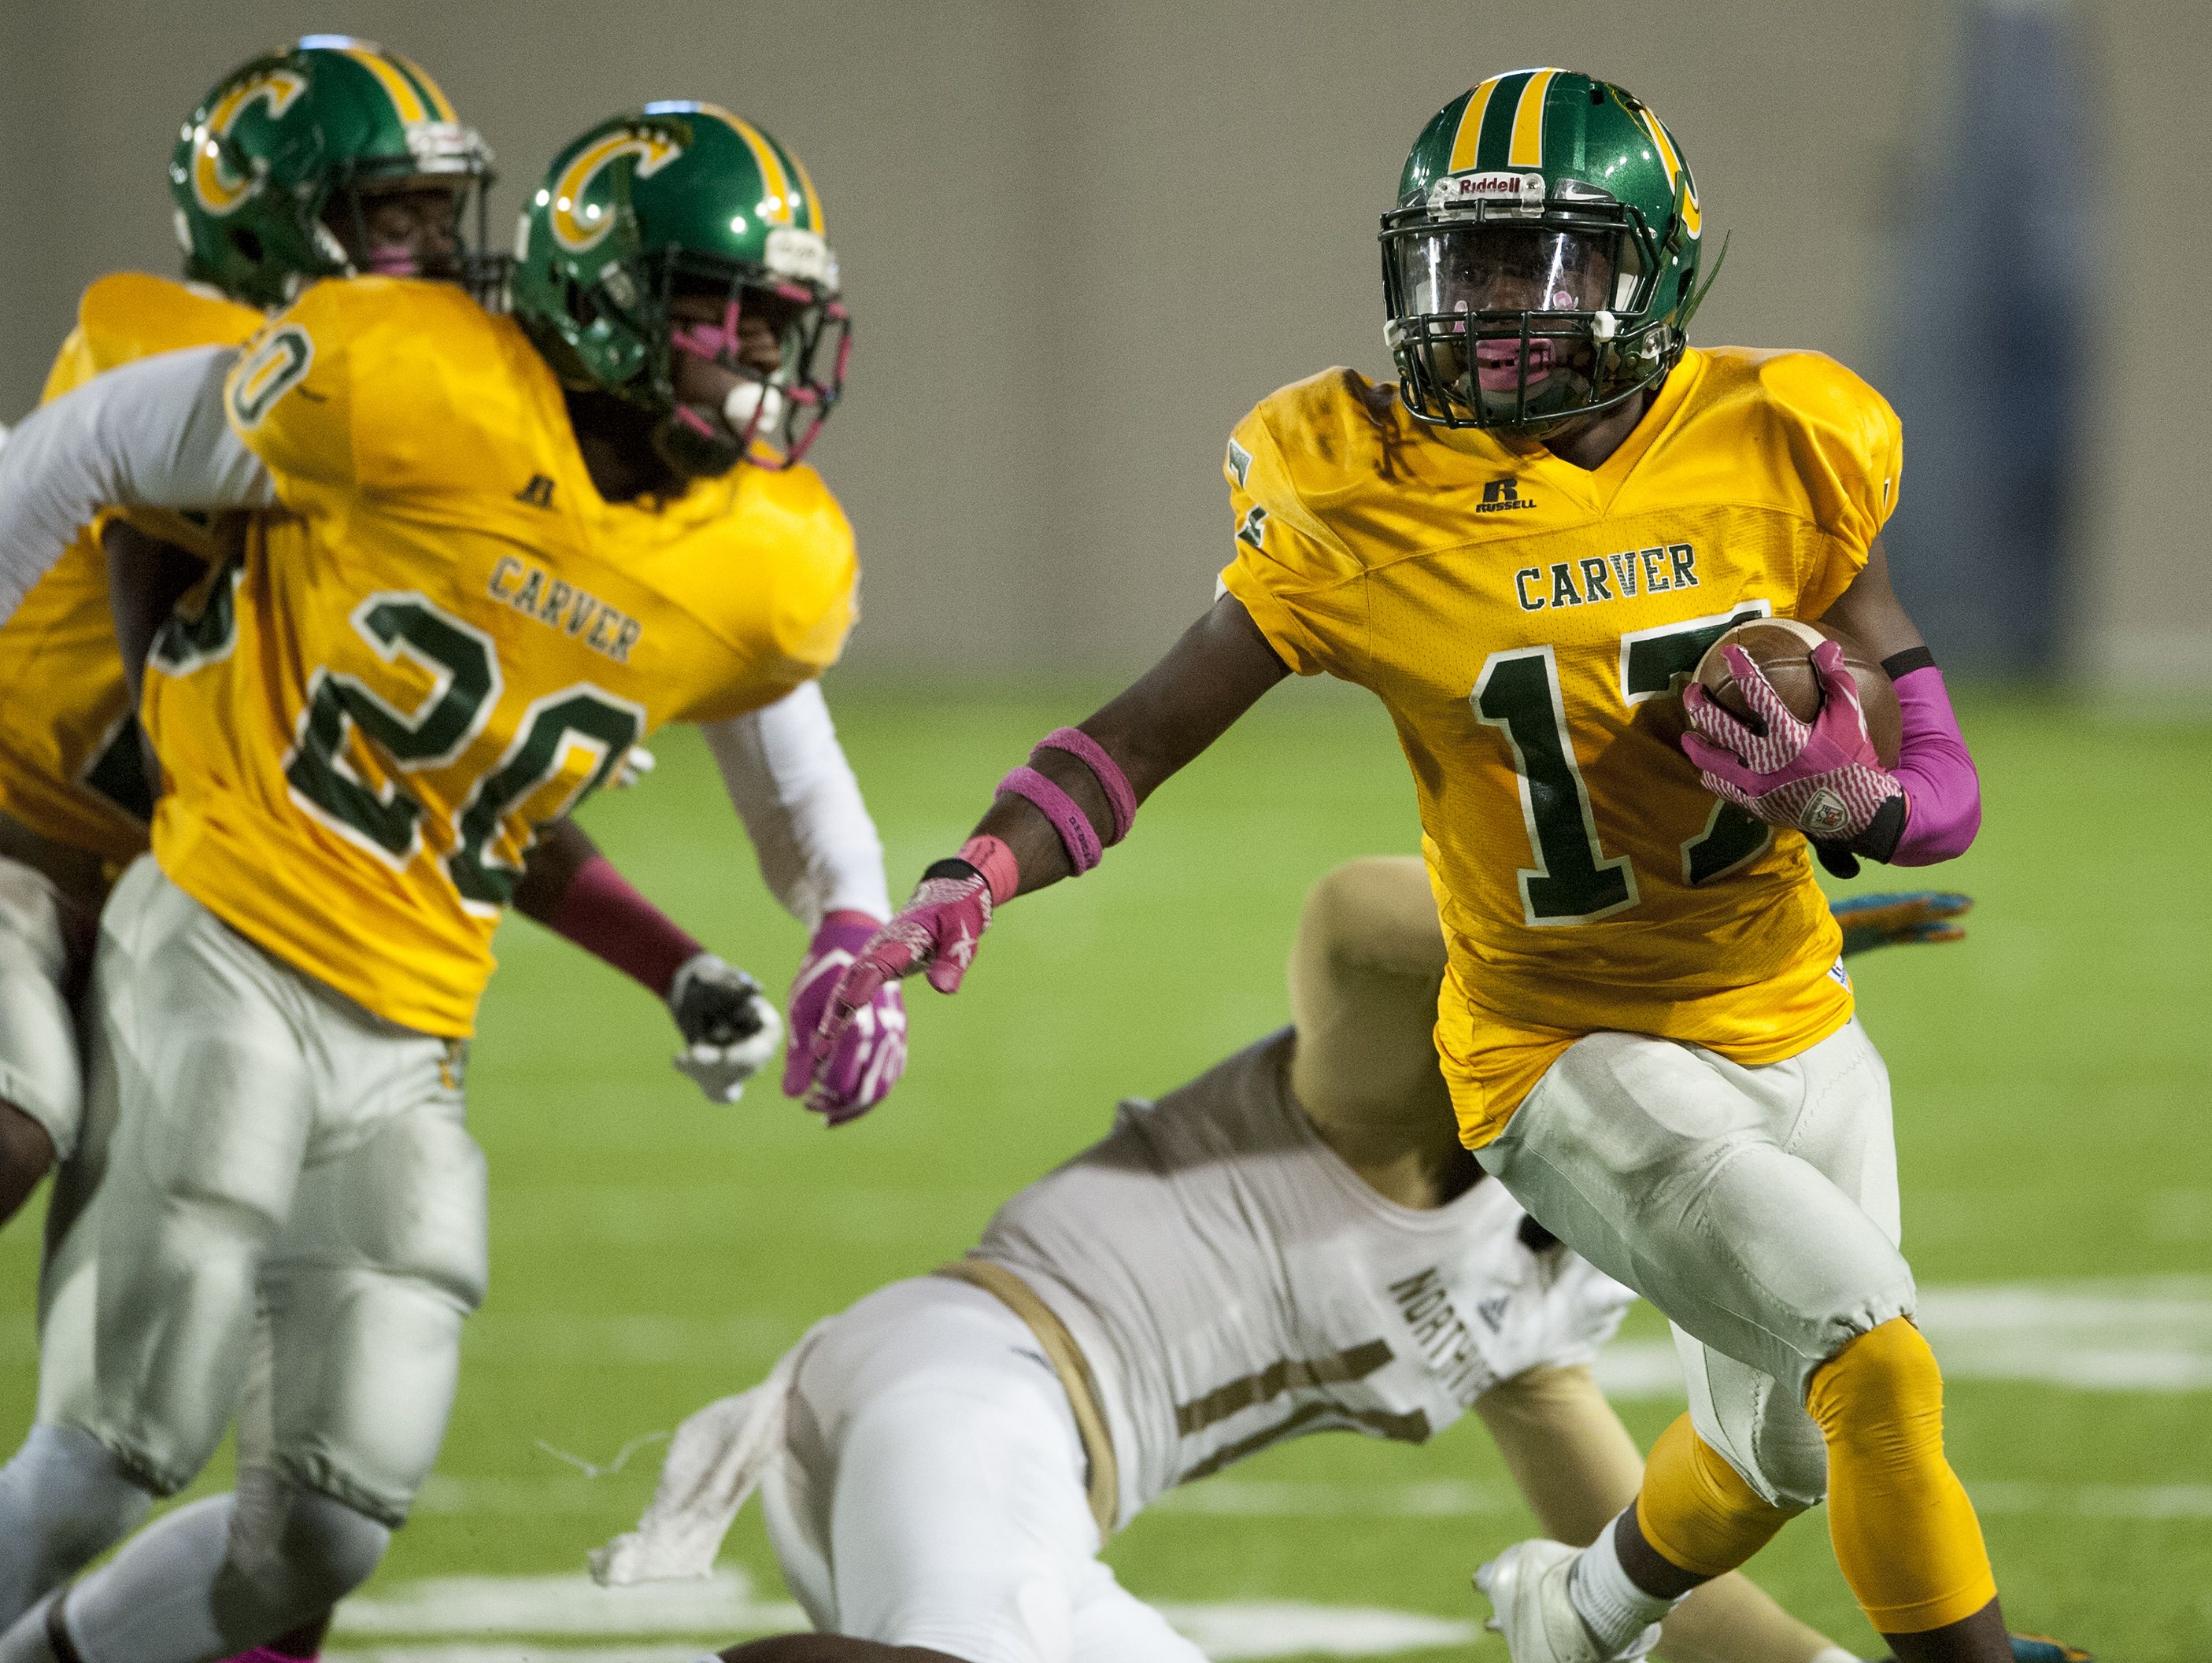 Carver's De'Marquis Russell returns an interception against Northview at Cramton Bowl in Montgomery, Ala., on Thursday October 13, 2016.